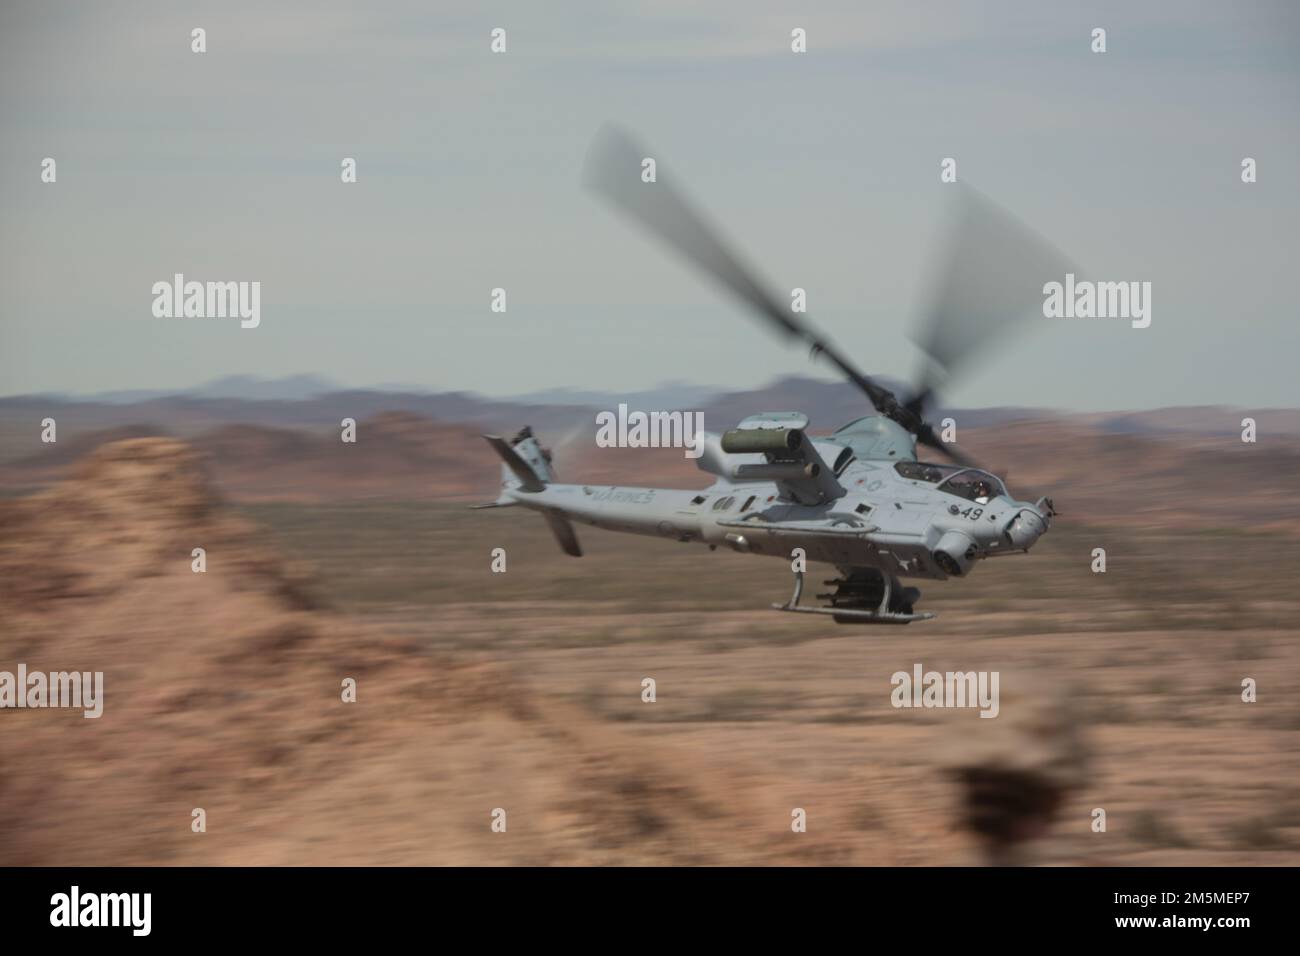 A U.S. Marine Corps AH-1Z Viper assigned to Marine Aviation Weapons and Tactics Squadron One (MAWTS-1), conducts close air support during Weapons and Tactics Instructor (WTI) course 2-22, near Chocolate Mountain Gunnery Range, California, March 25, 2022. WTI is a seven-week training event hosted by MAWTS-1, providing standardized advanced tactical training and certification of unit instructor qualifications to support Marine aviation training and readiness, and assists in developing and employing aviation weapons and tactics. Stock Photo